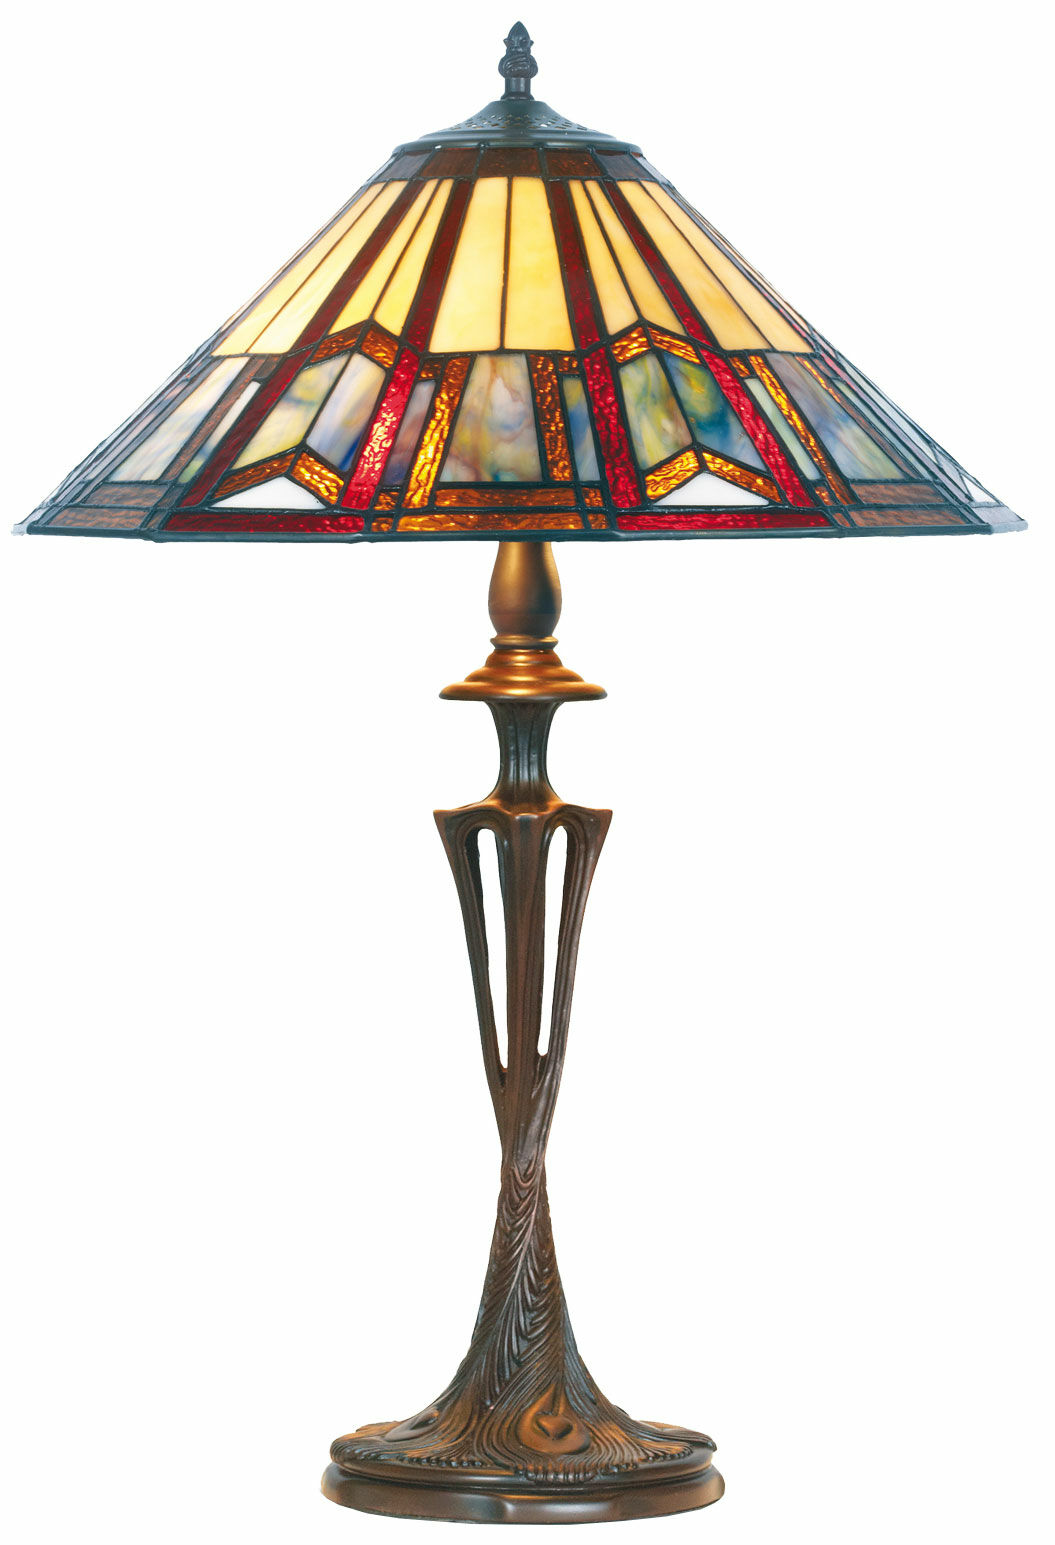 Table lamp "Eve" - after Louis C. Tiffany